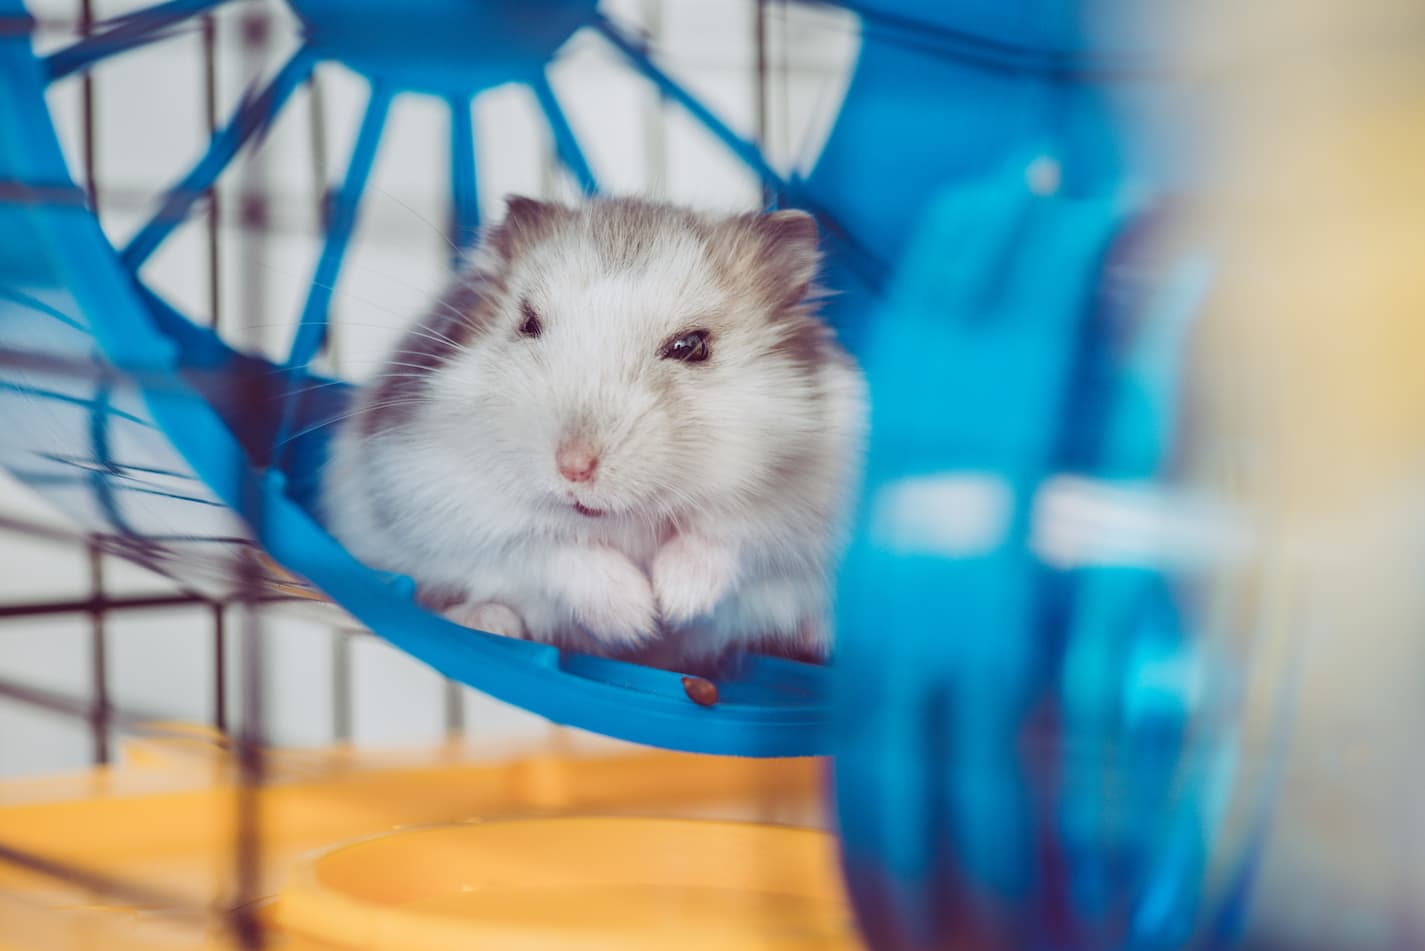 An image of a hamster or small rodent on a hamster wheel